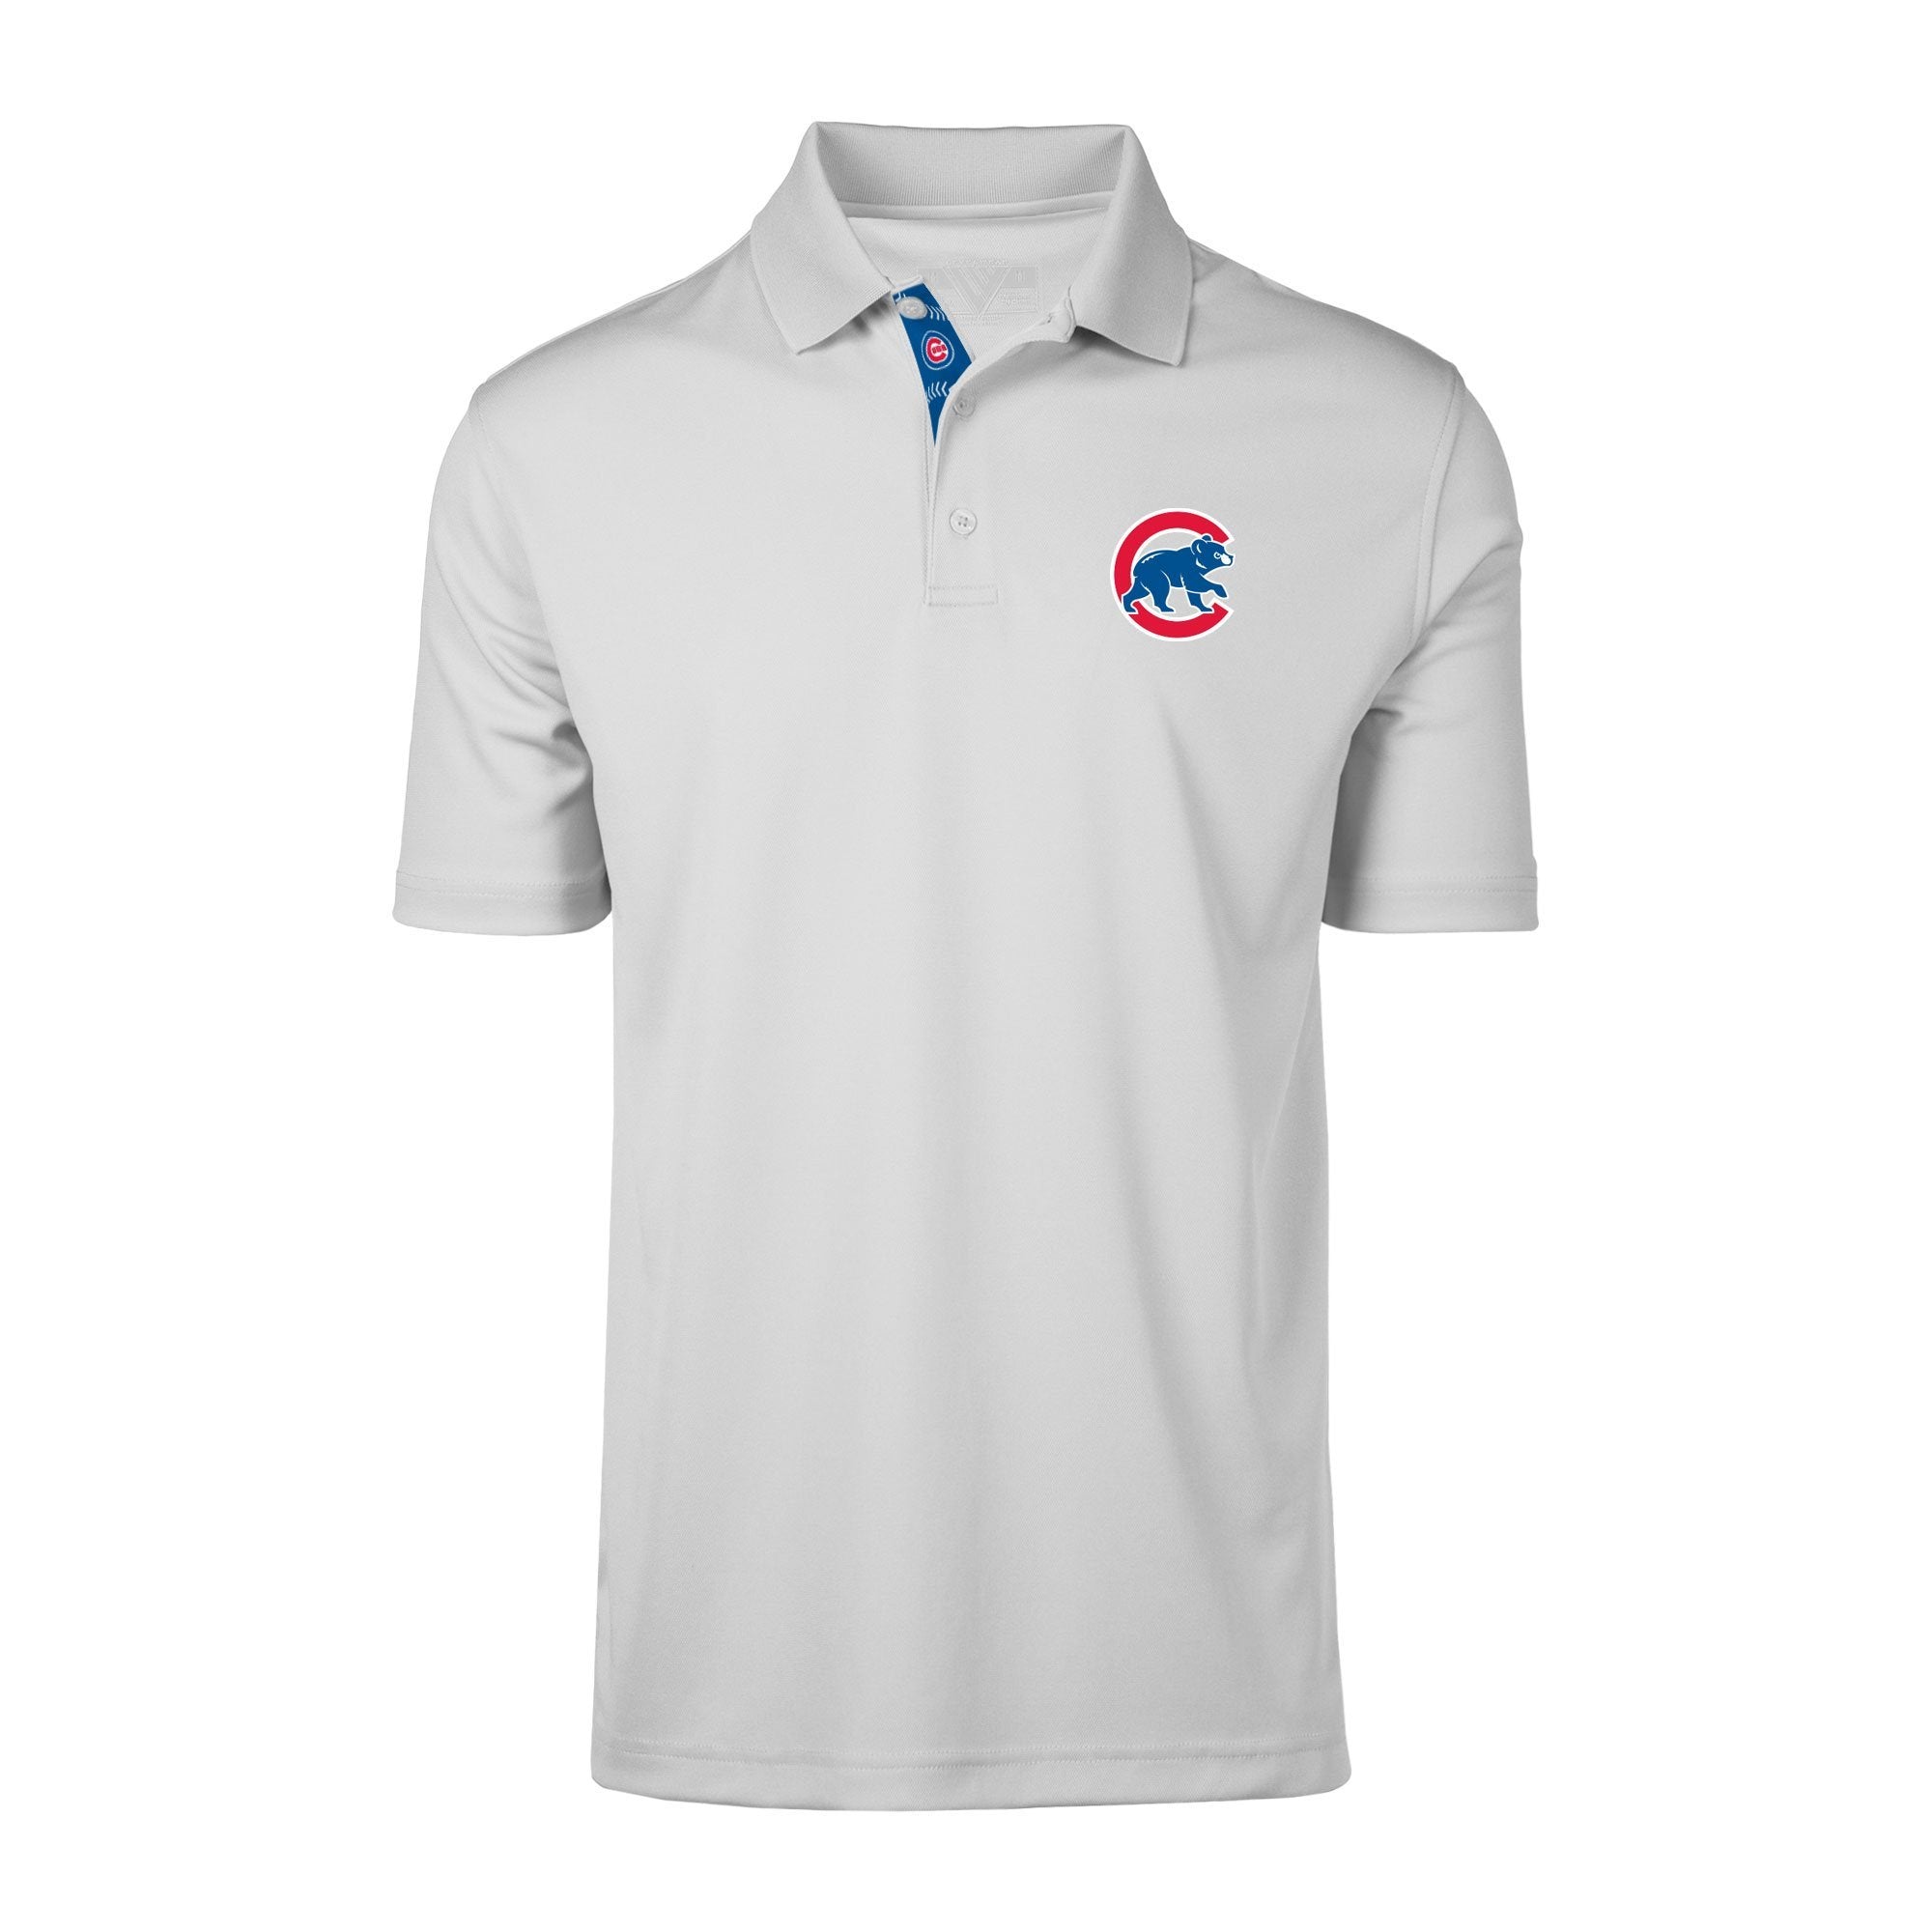  VF Chicago Cubs Patriotic Men's Moisture Wicking Two-Tone Polo  Shirt (as1, Alpha, s, Regular, Regular) Blue : Sports & Outdoors